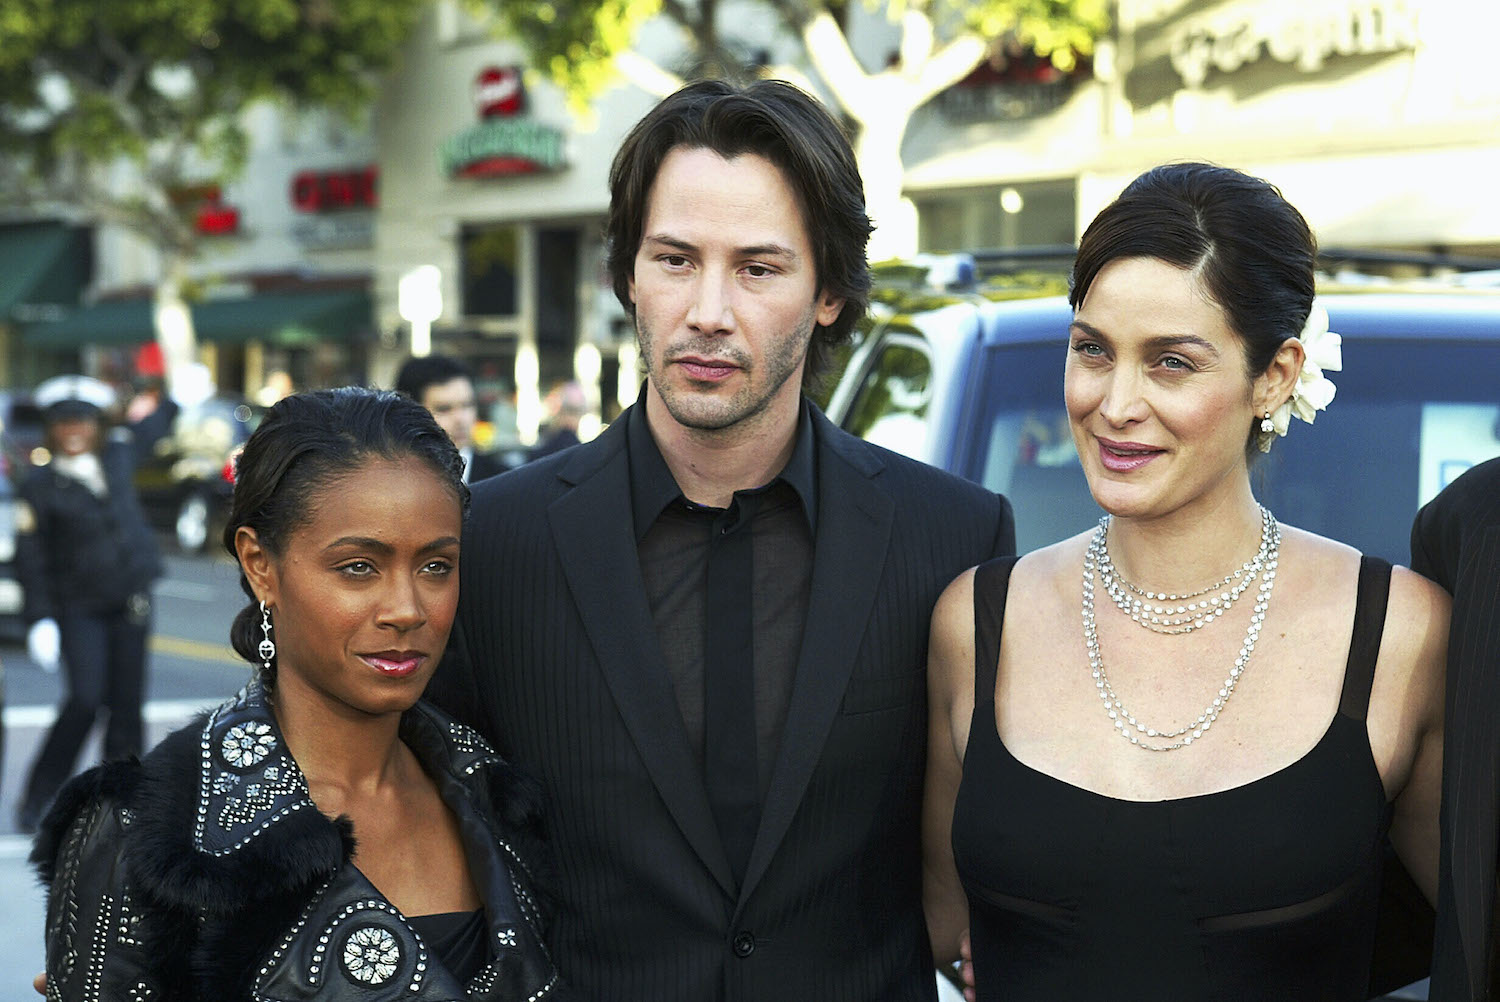 Jada Pinkett Smith, Keanu Reeves, and Carrie-Anne Moss at the premiere of The Matrix Reloaded'